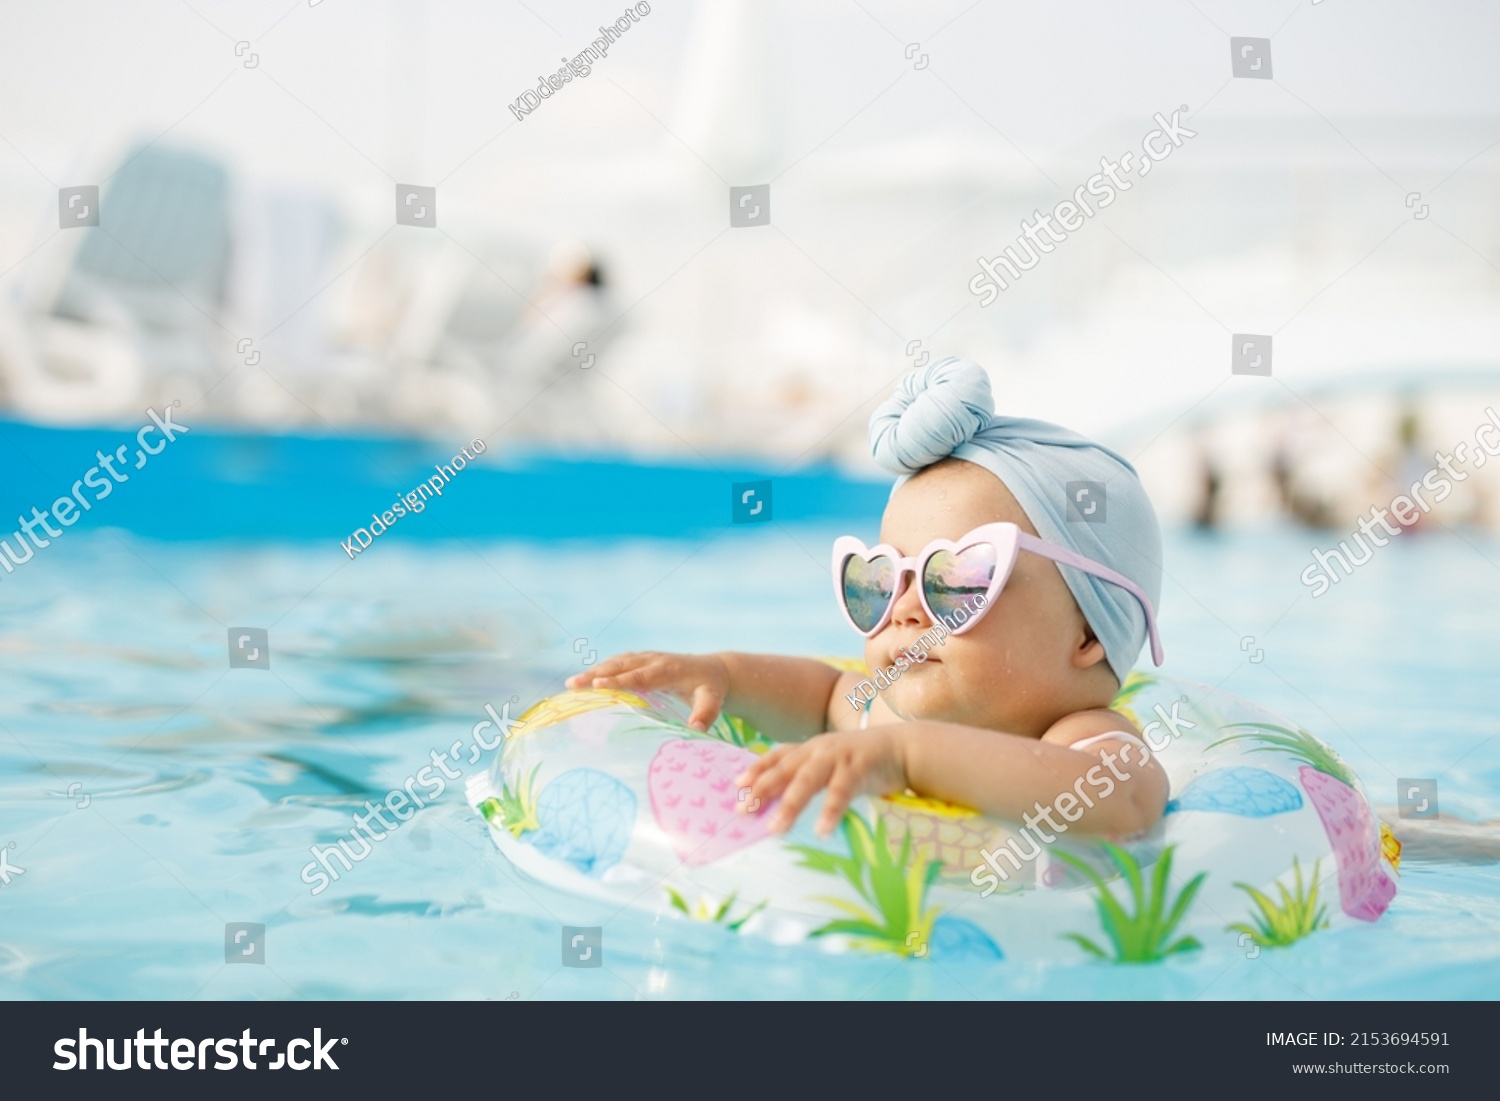 Cute funny toddler girl in colorful swimsuit and sunglasses relaxing on inflatable toy ring floating in pool have fun during summer vacation in tropical resort. Child having fun in swimming pool.  #2153694591